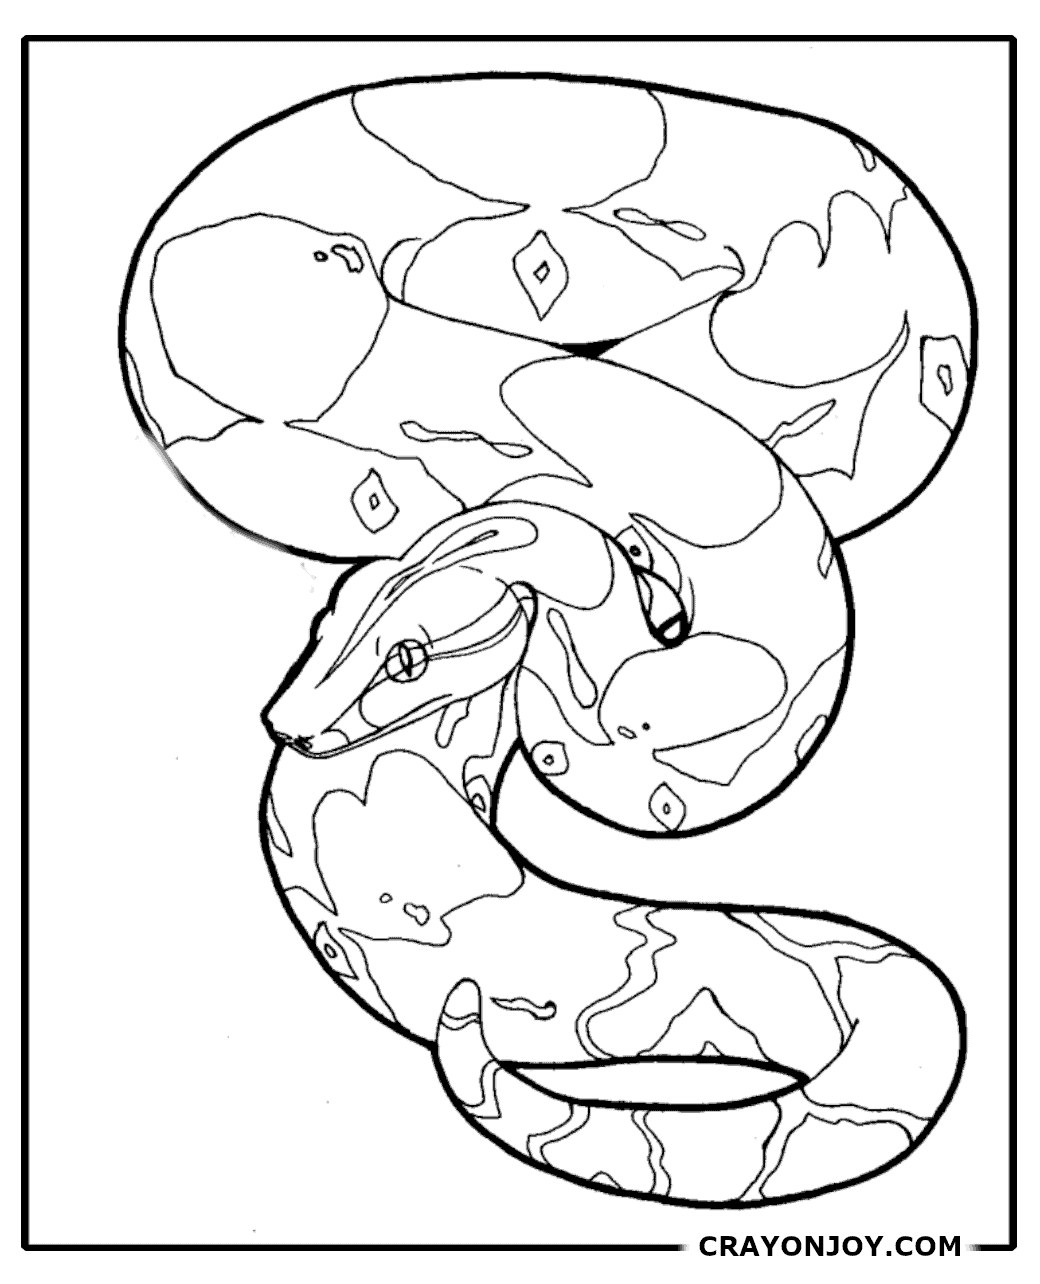 Free Printable Boa Constrictor Coloring Pages